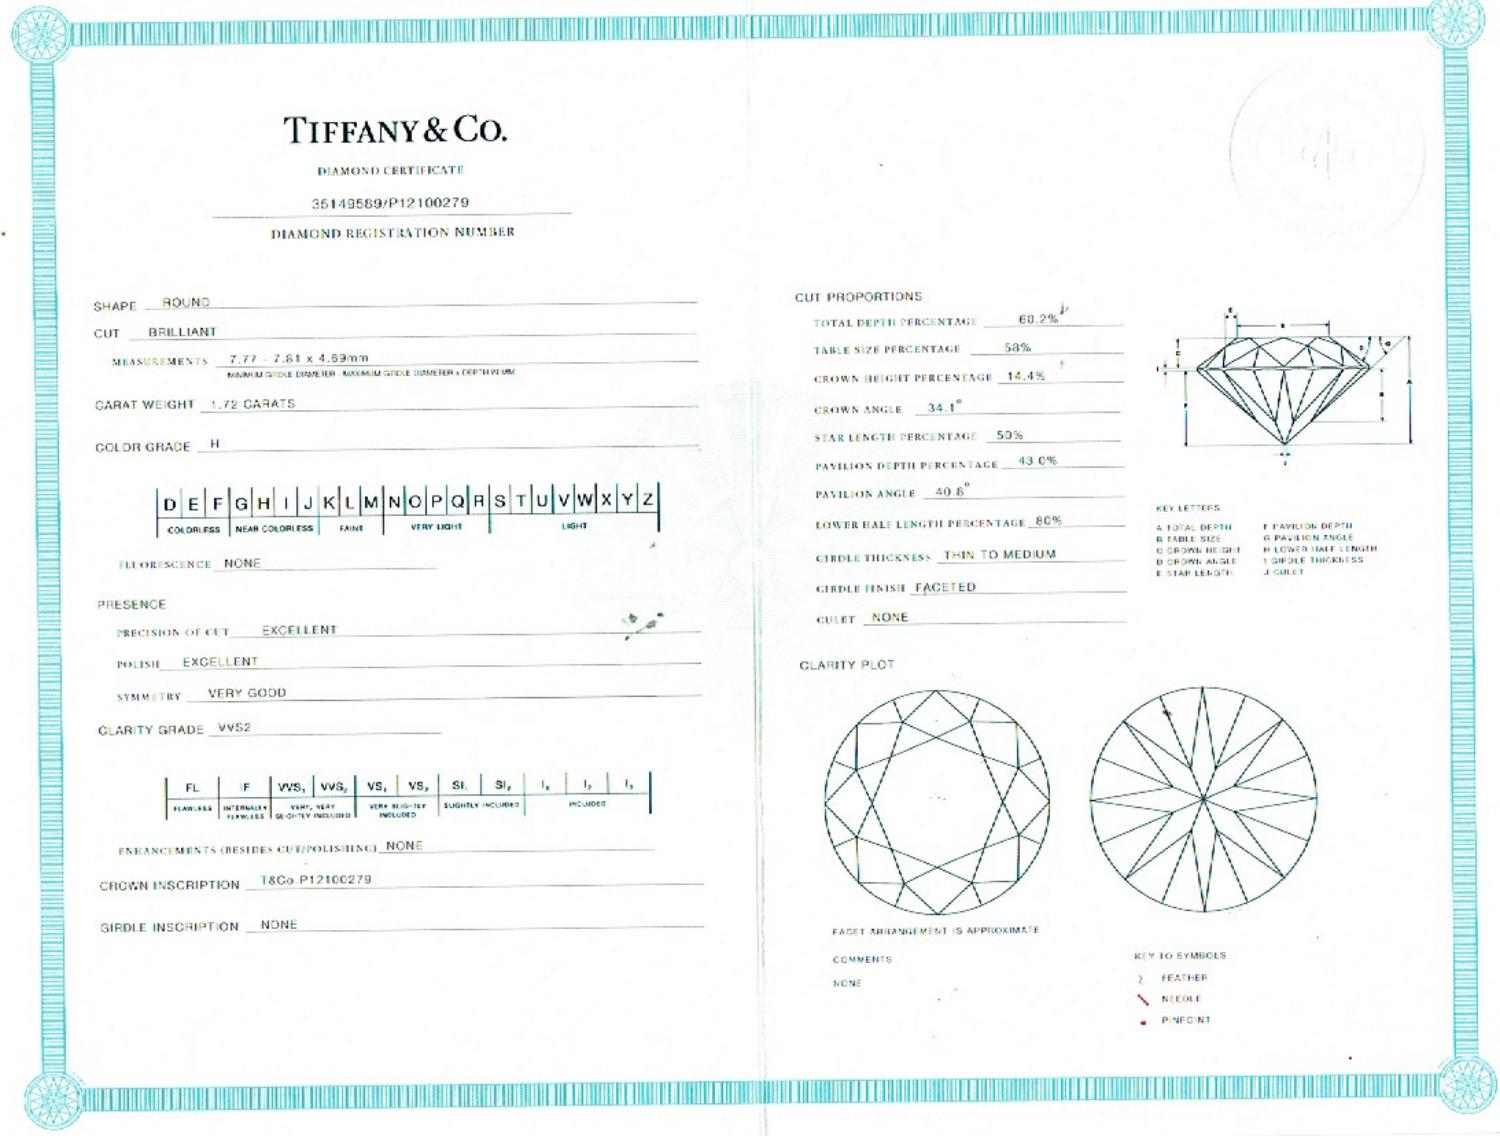 Round Cut Tiffany & Co Round Diamond Solitaire 1.72 cts H VVS2 Plat Engagement Ring Papers For Sale